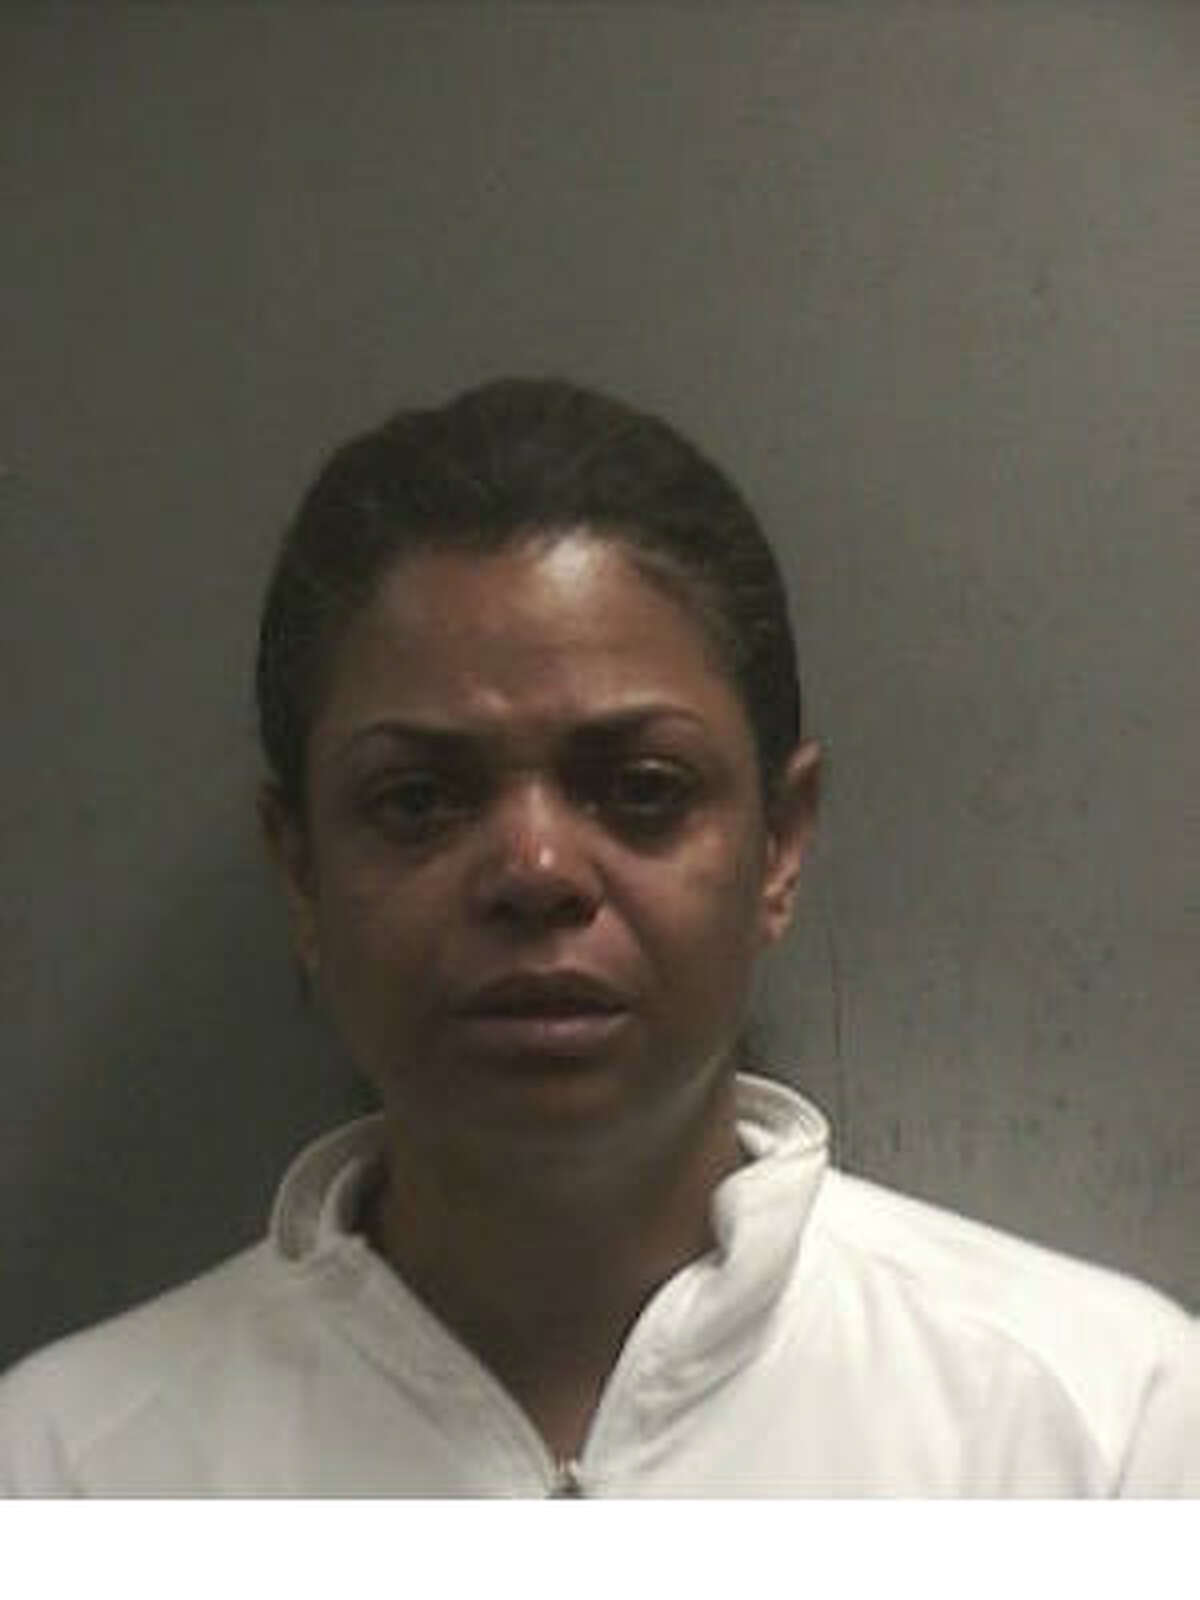 Marcia Sinclair, 43, is accused of embezzling about $6 million from her employer over a four-year period.